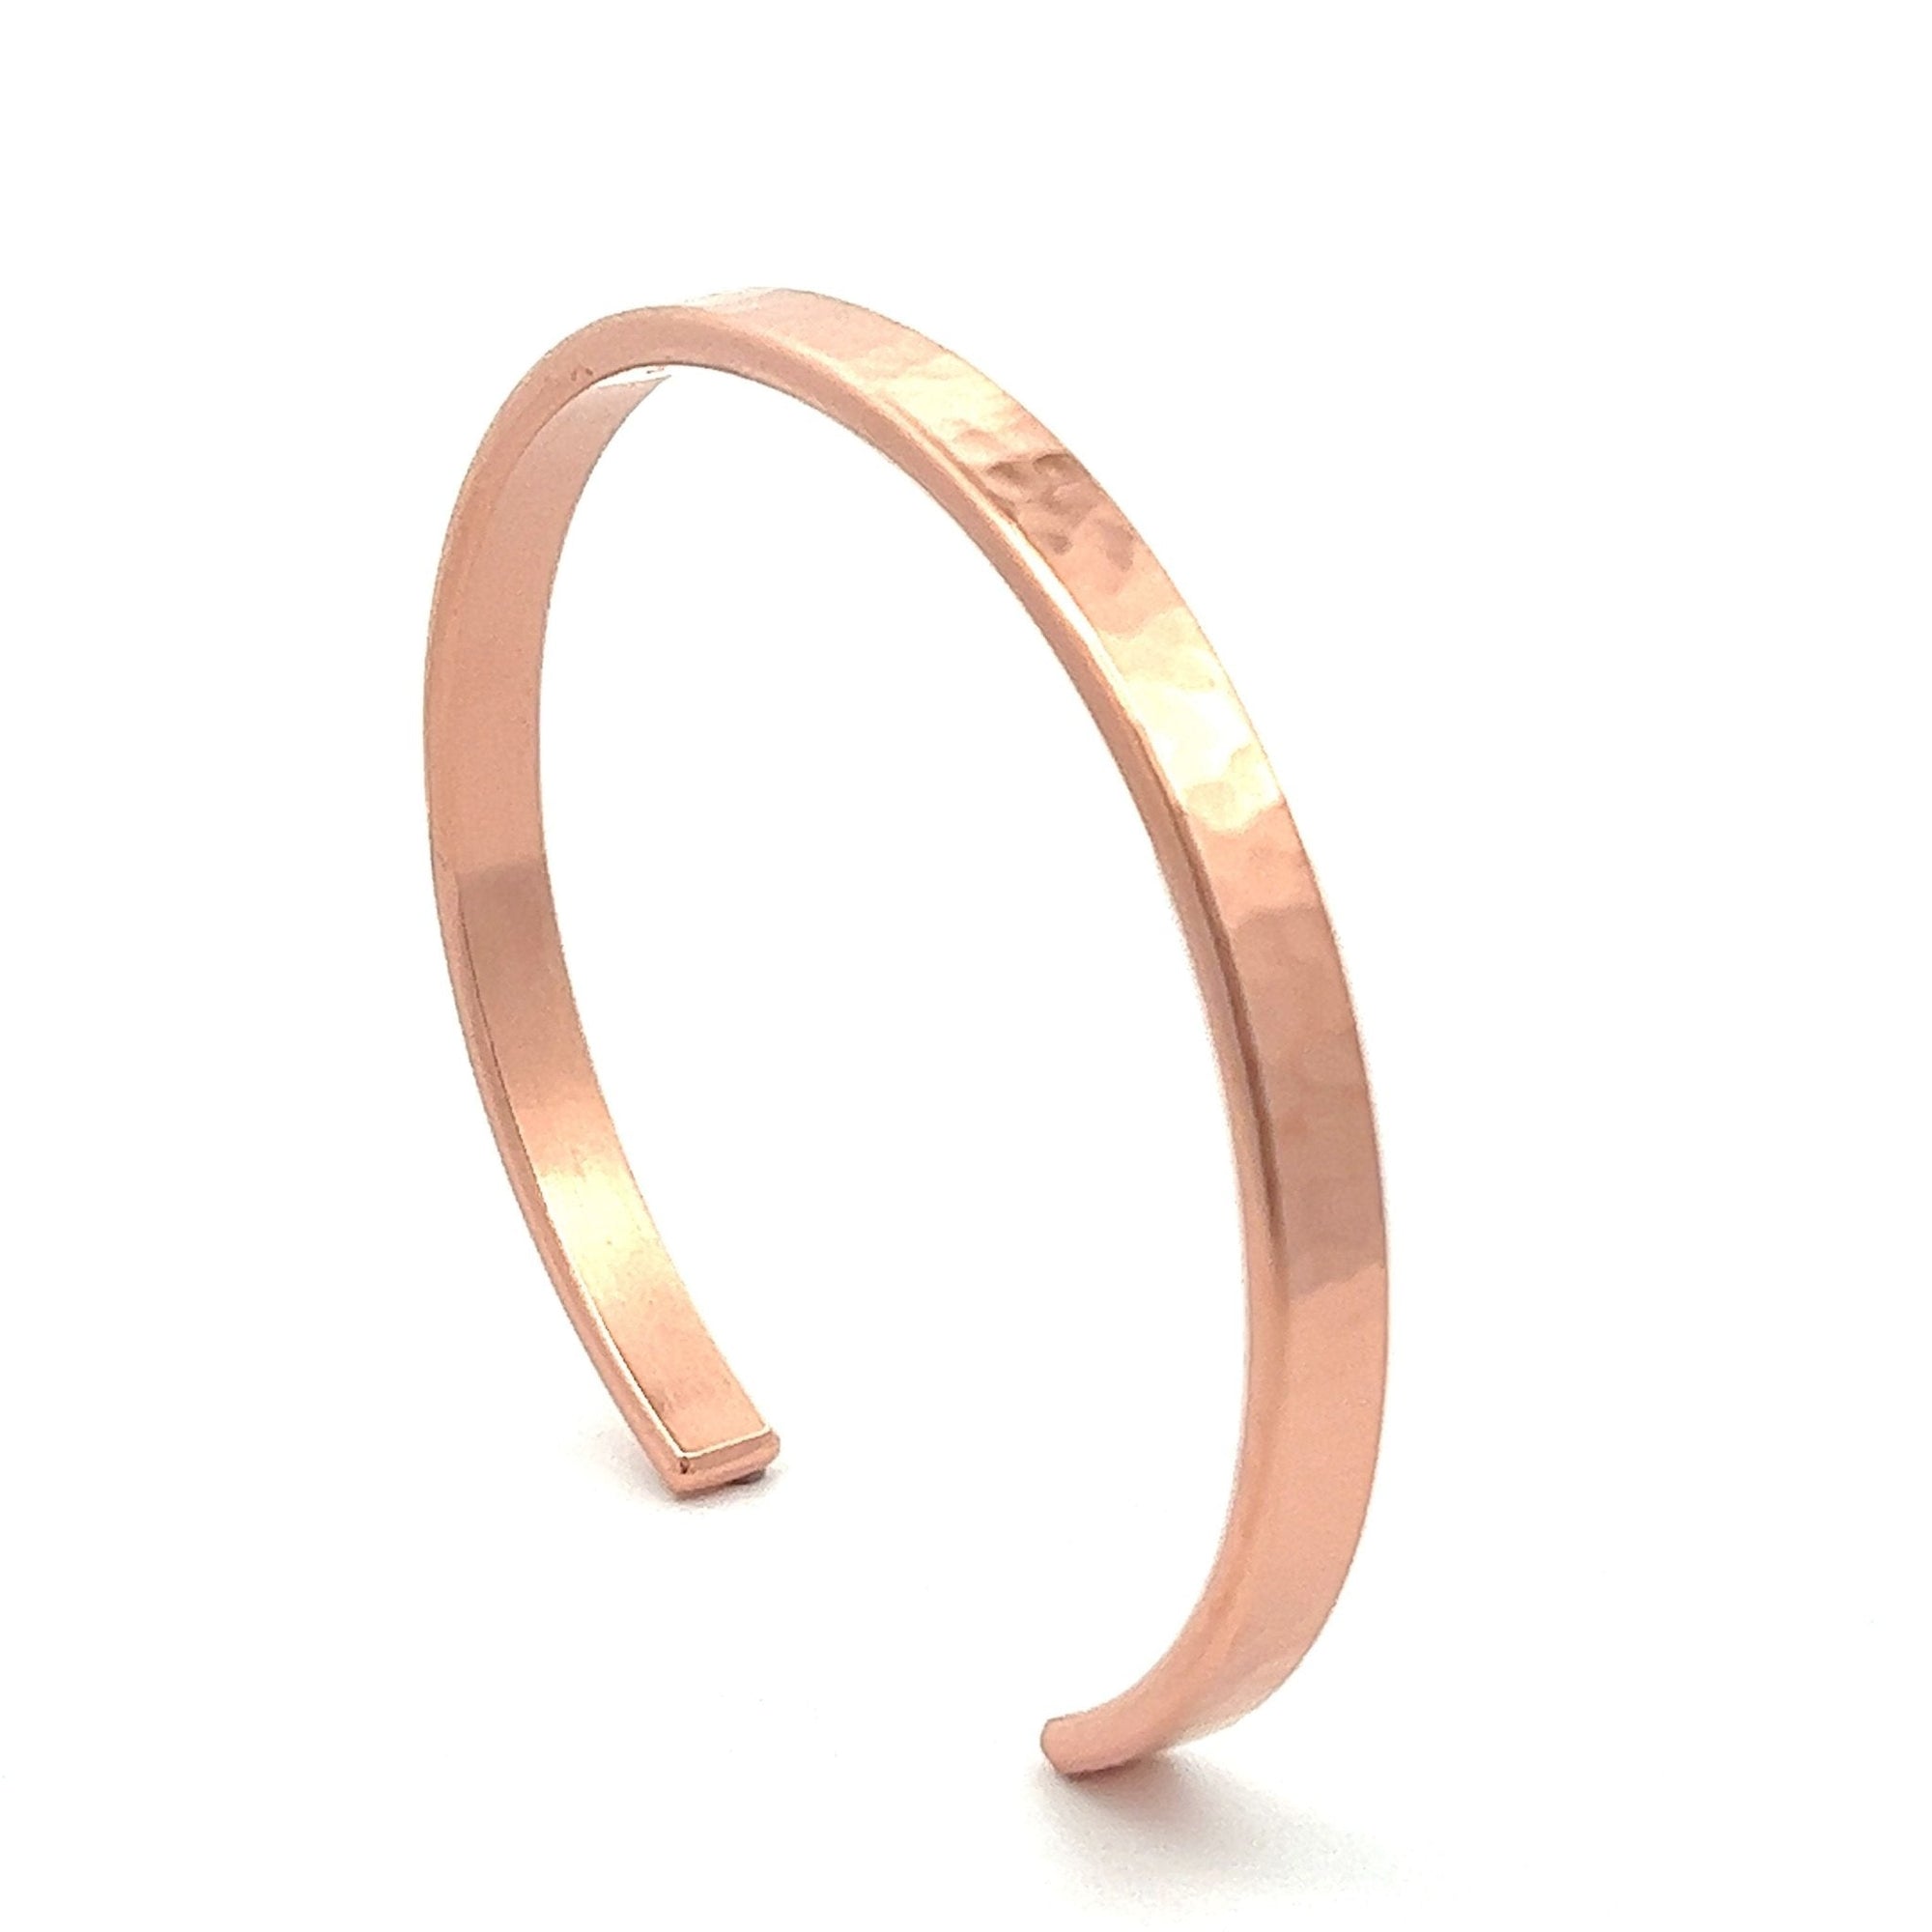 Right View of 4mm Wide Men's Hammered Copper Cuff Bracelet